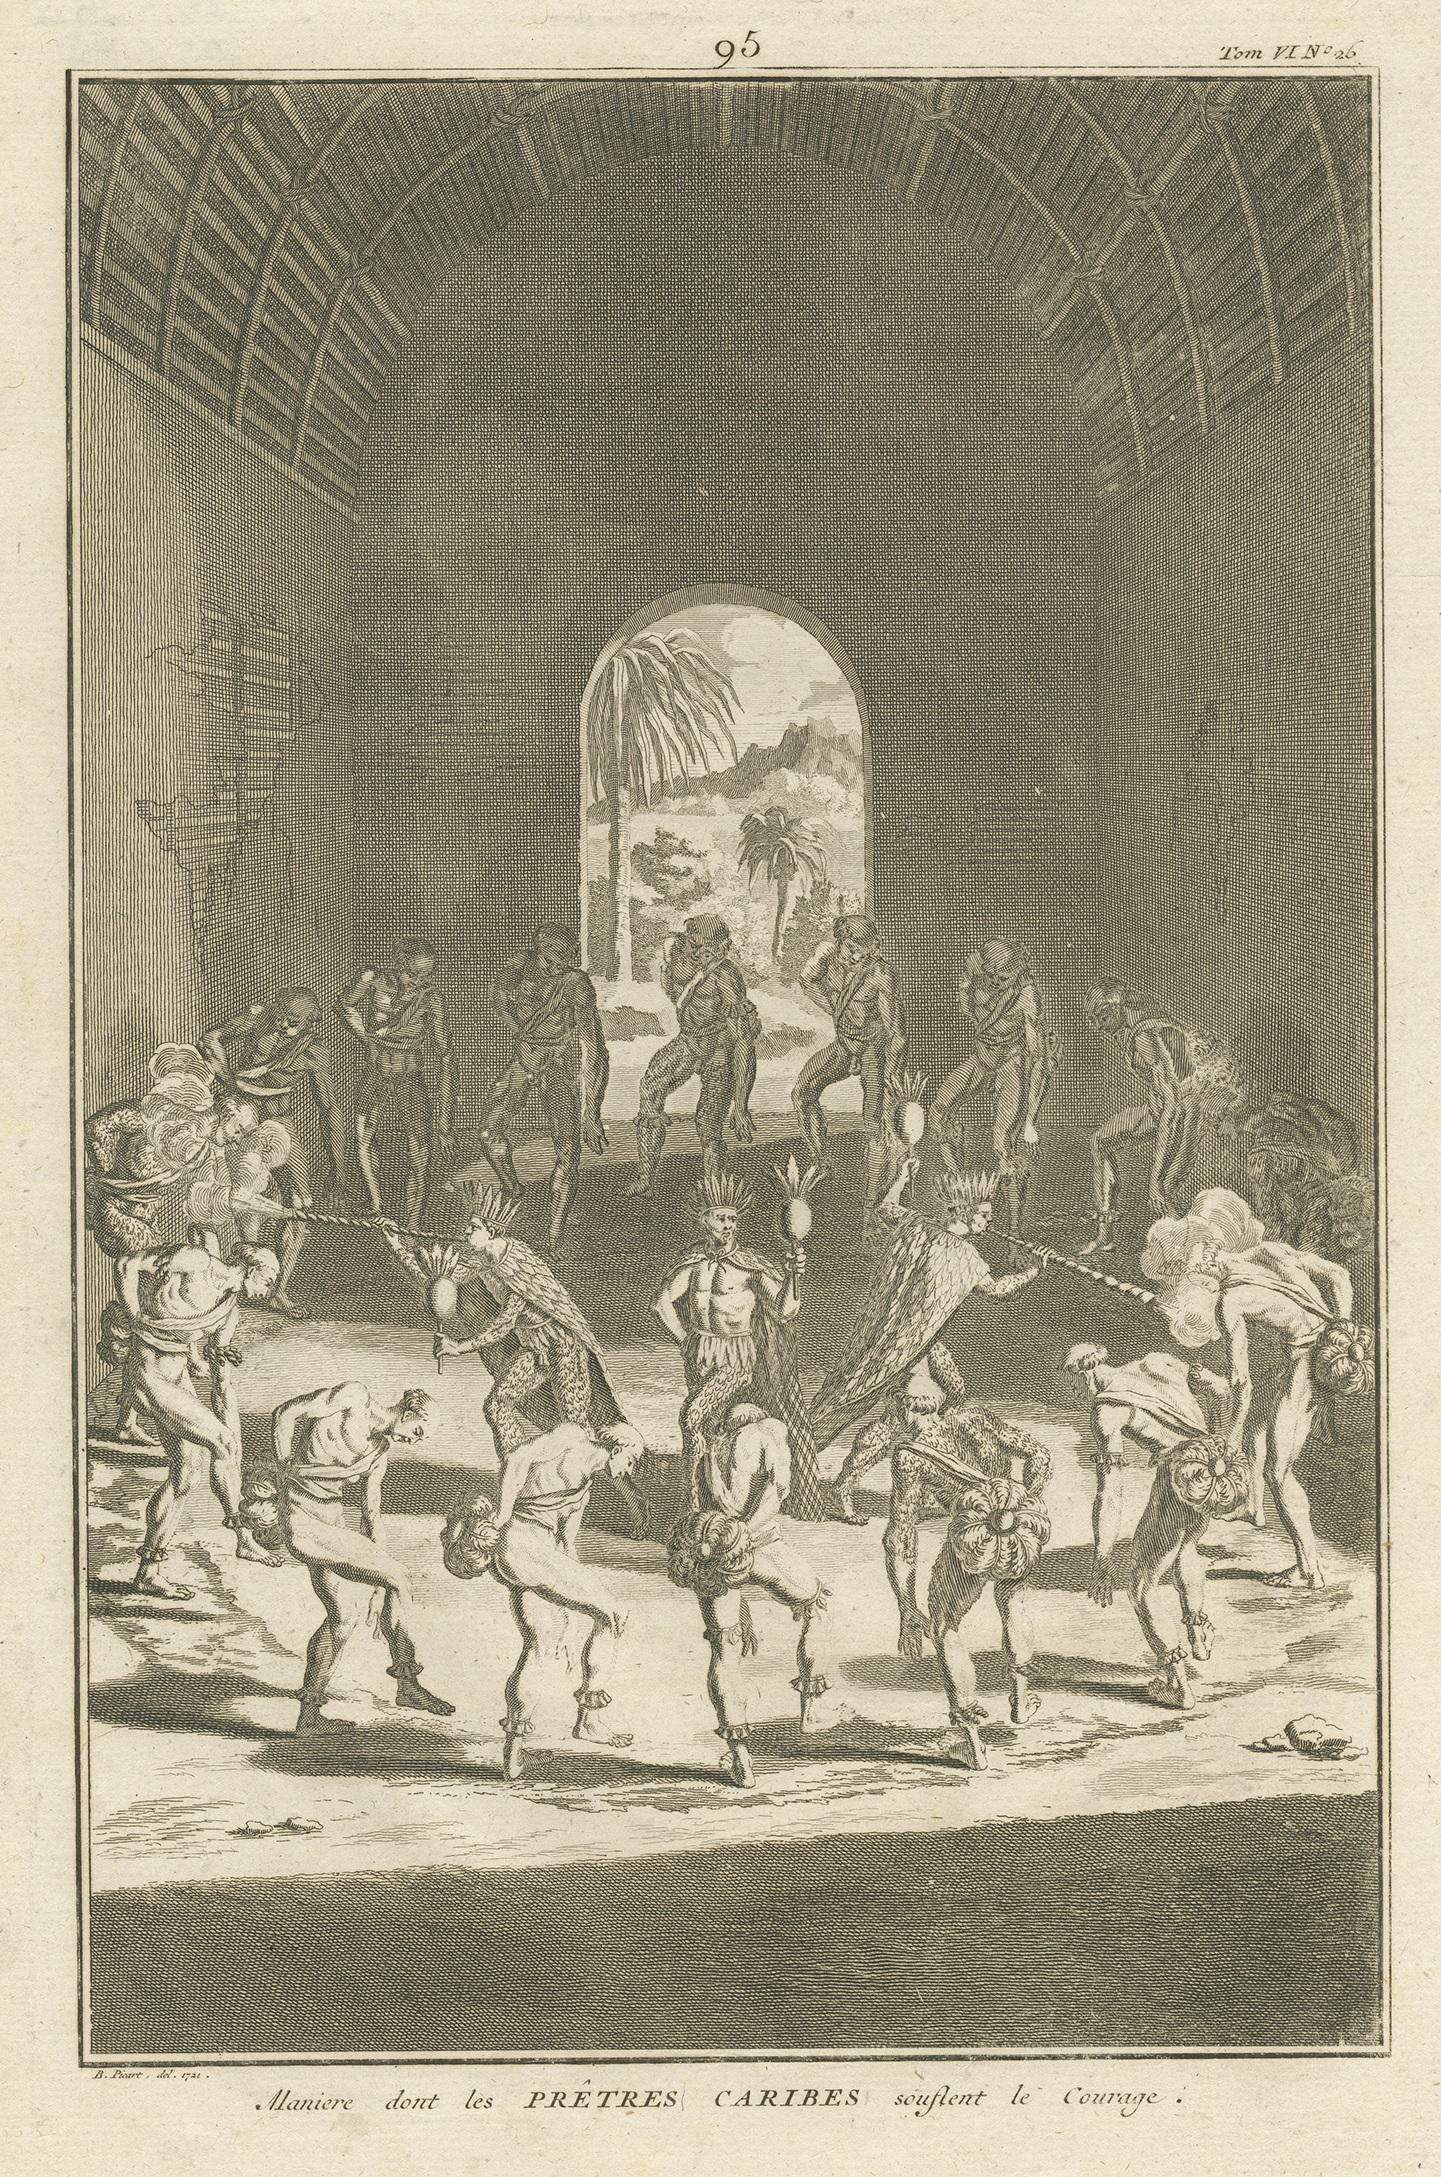 Antique religion print titled 'Maniere dont les Prêtres Caribes souflent le Courage'. This print depicts native Americans of Venezuela dancing in a dwelling preparing for war. This print originates from 'Ceremonies et costumes Religieuses (..)'.